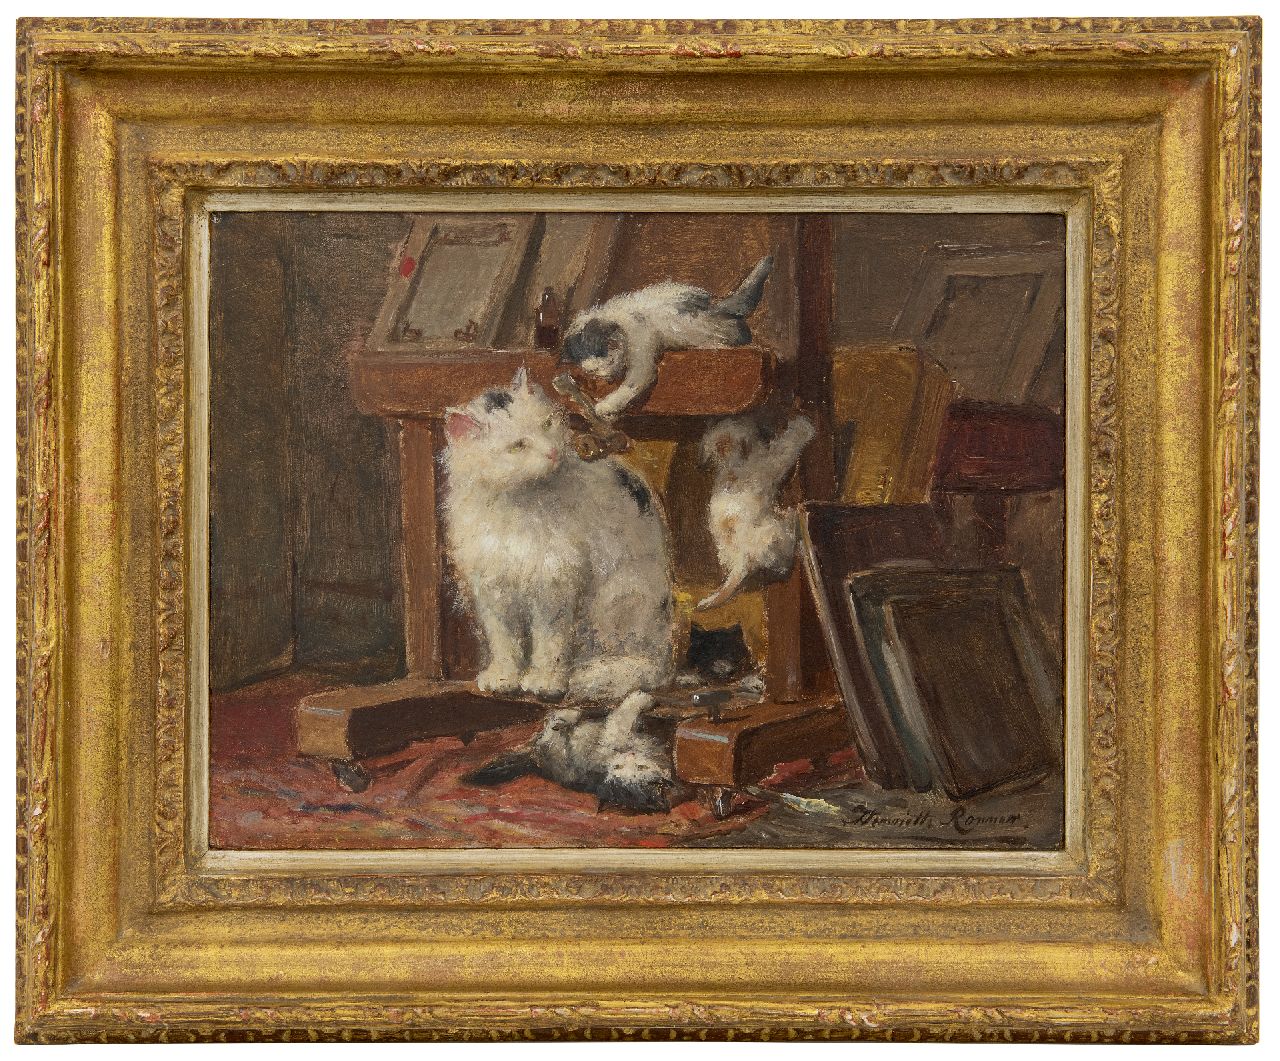 Ronner-Knip H.  | Henriette Ronner-Knip, Mother cat with kittens in the studio, oil on paper laid down on panel 28.1 x 37.1 cm, signed l.r.